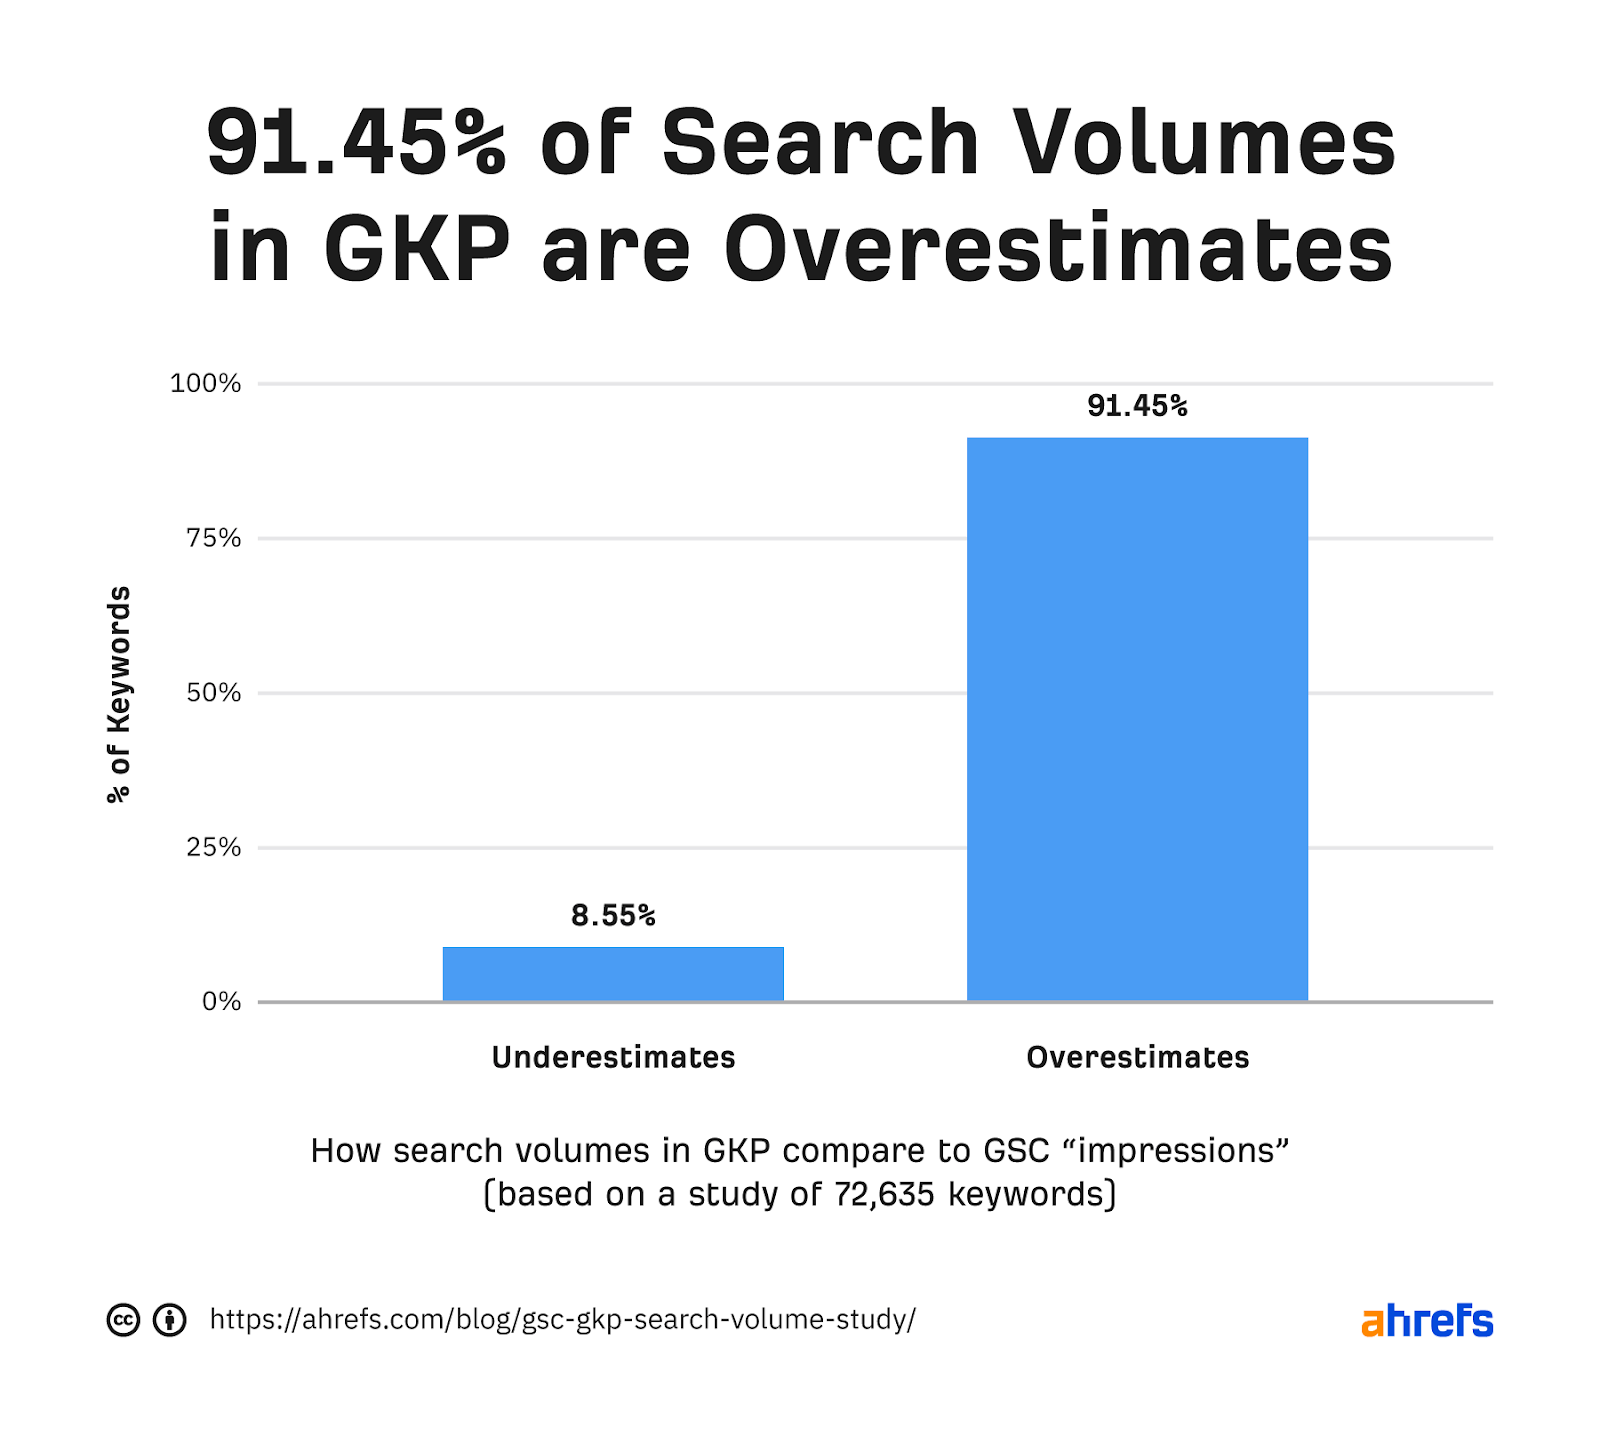 91.45% of search volumes in GKP are overestimates
